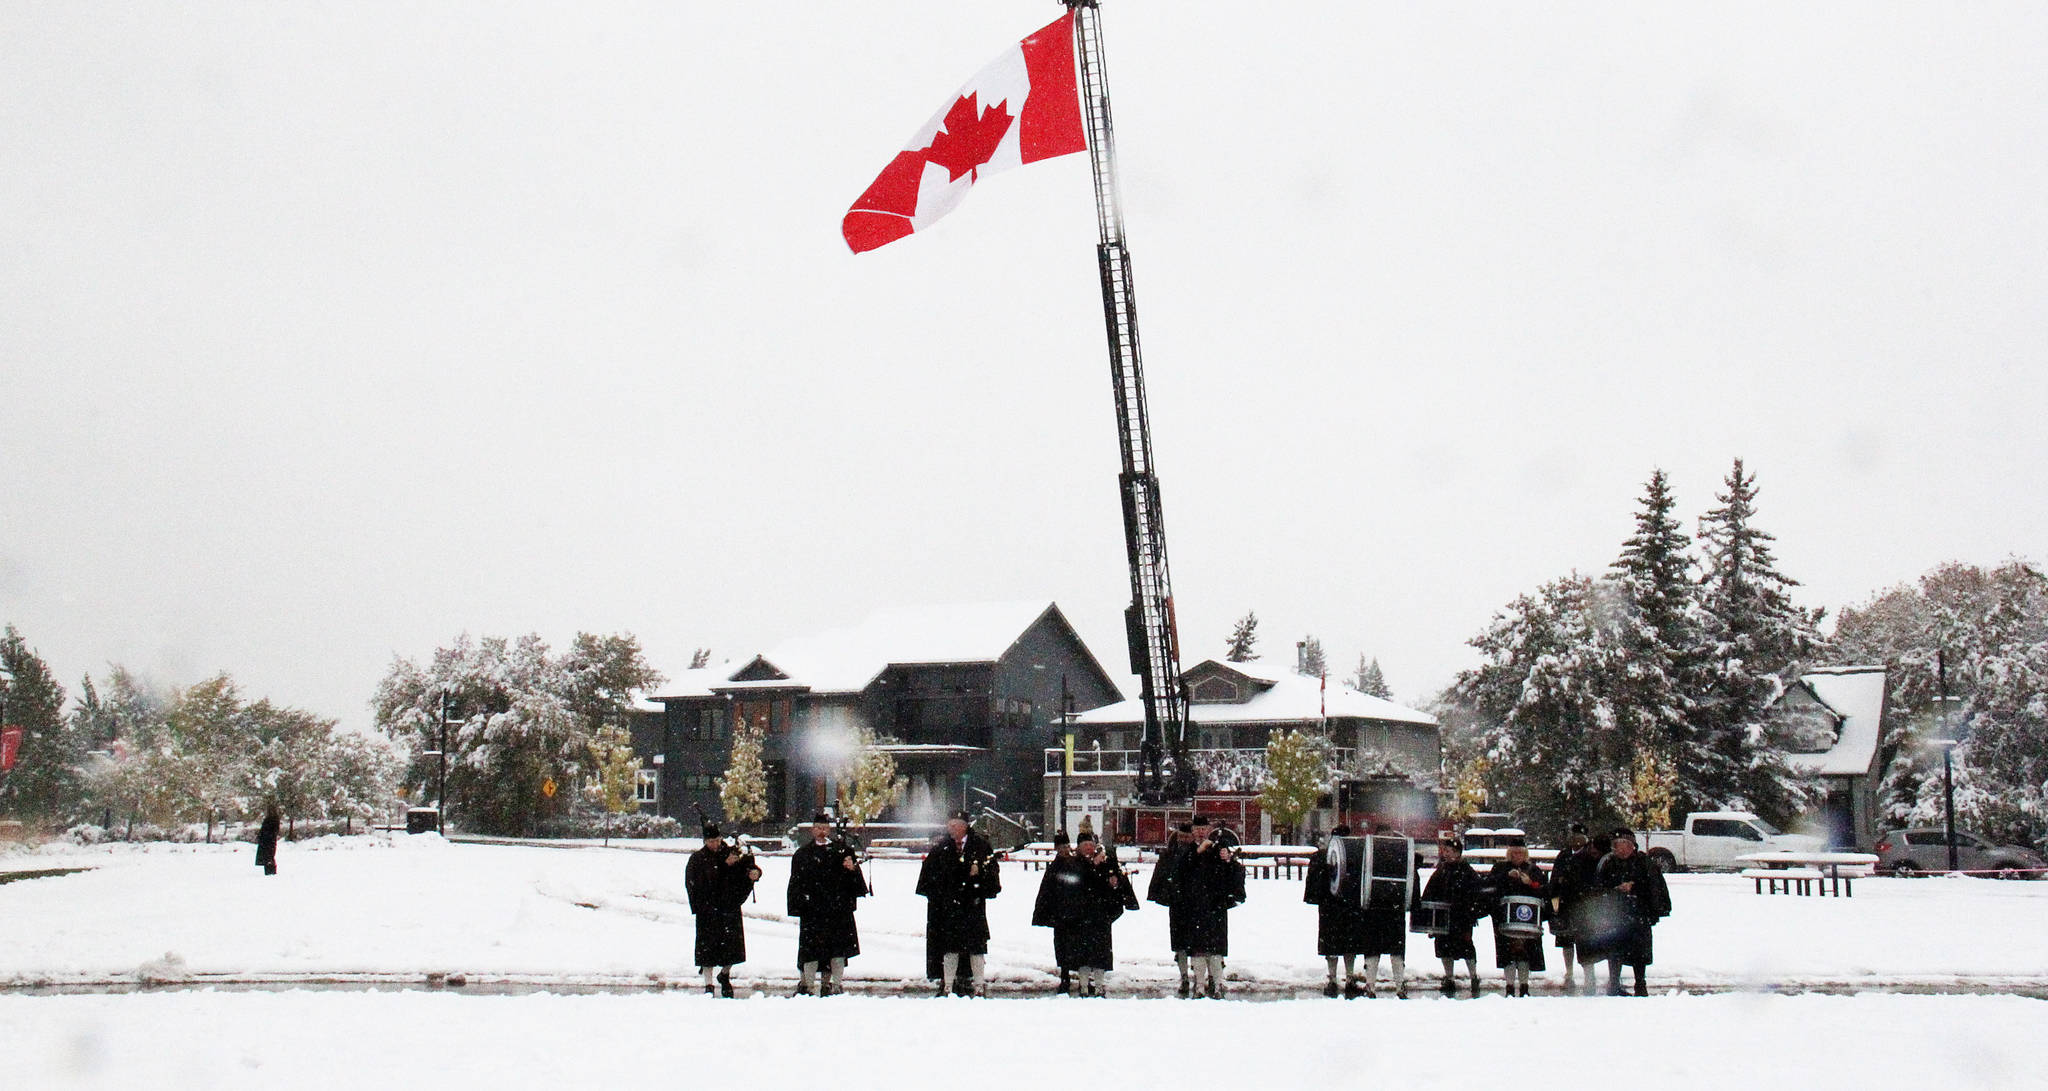 The opening ceremonies featured a pipe band, the national anthem and words from several dignitaries. Photo by Kaylyn Whibbs, Sylvan Lake News.